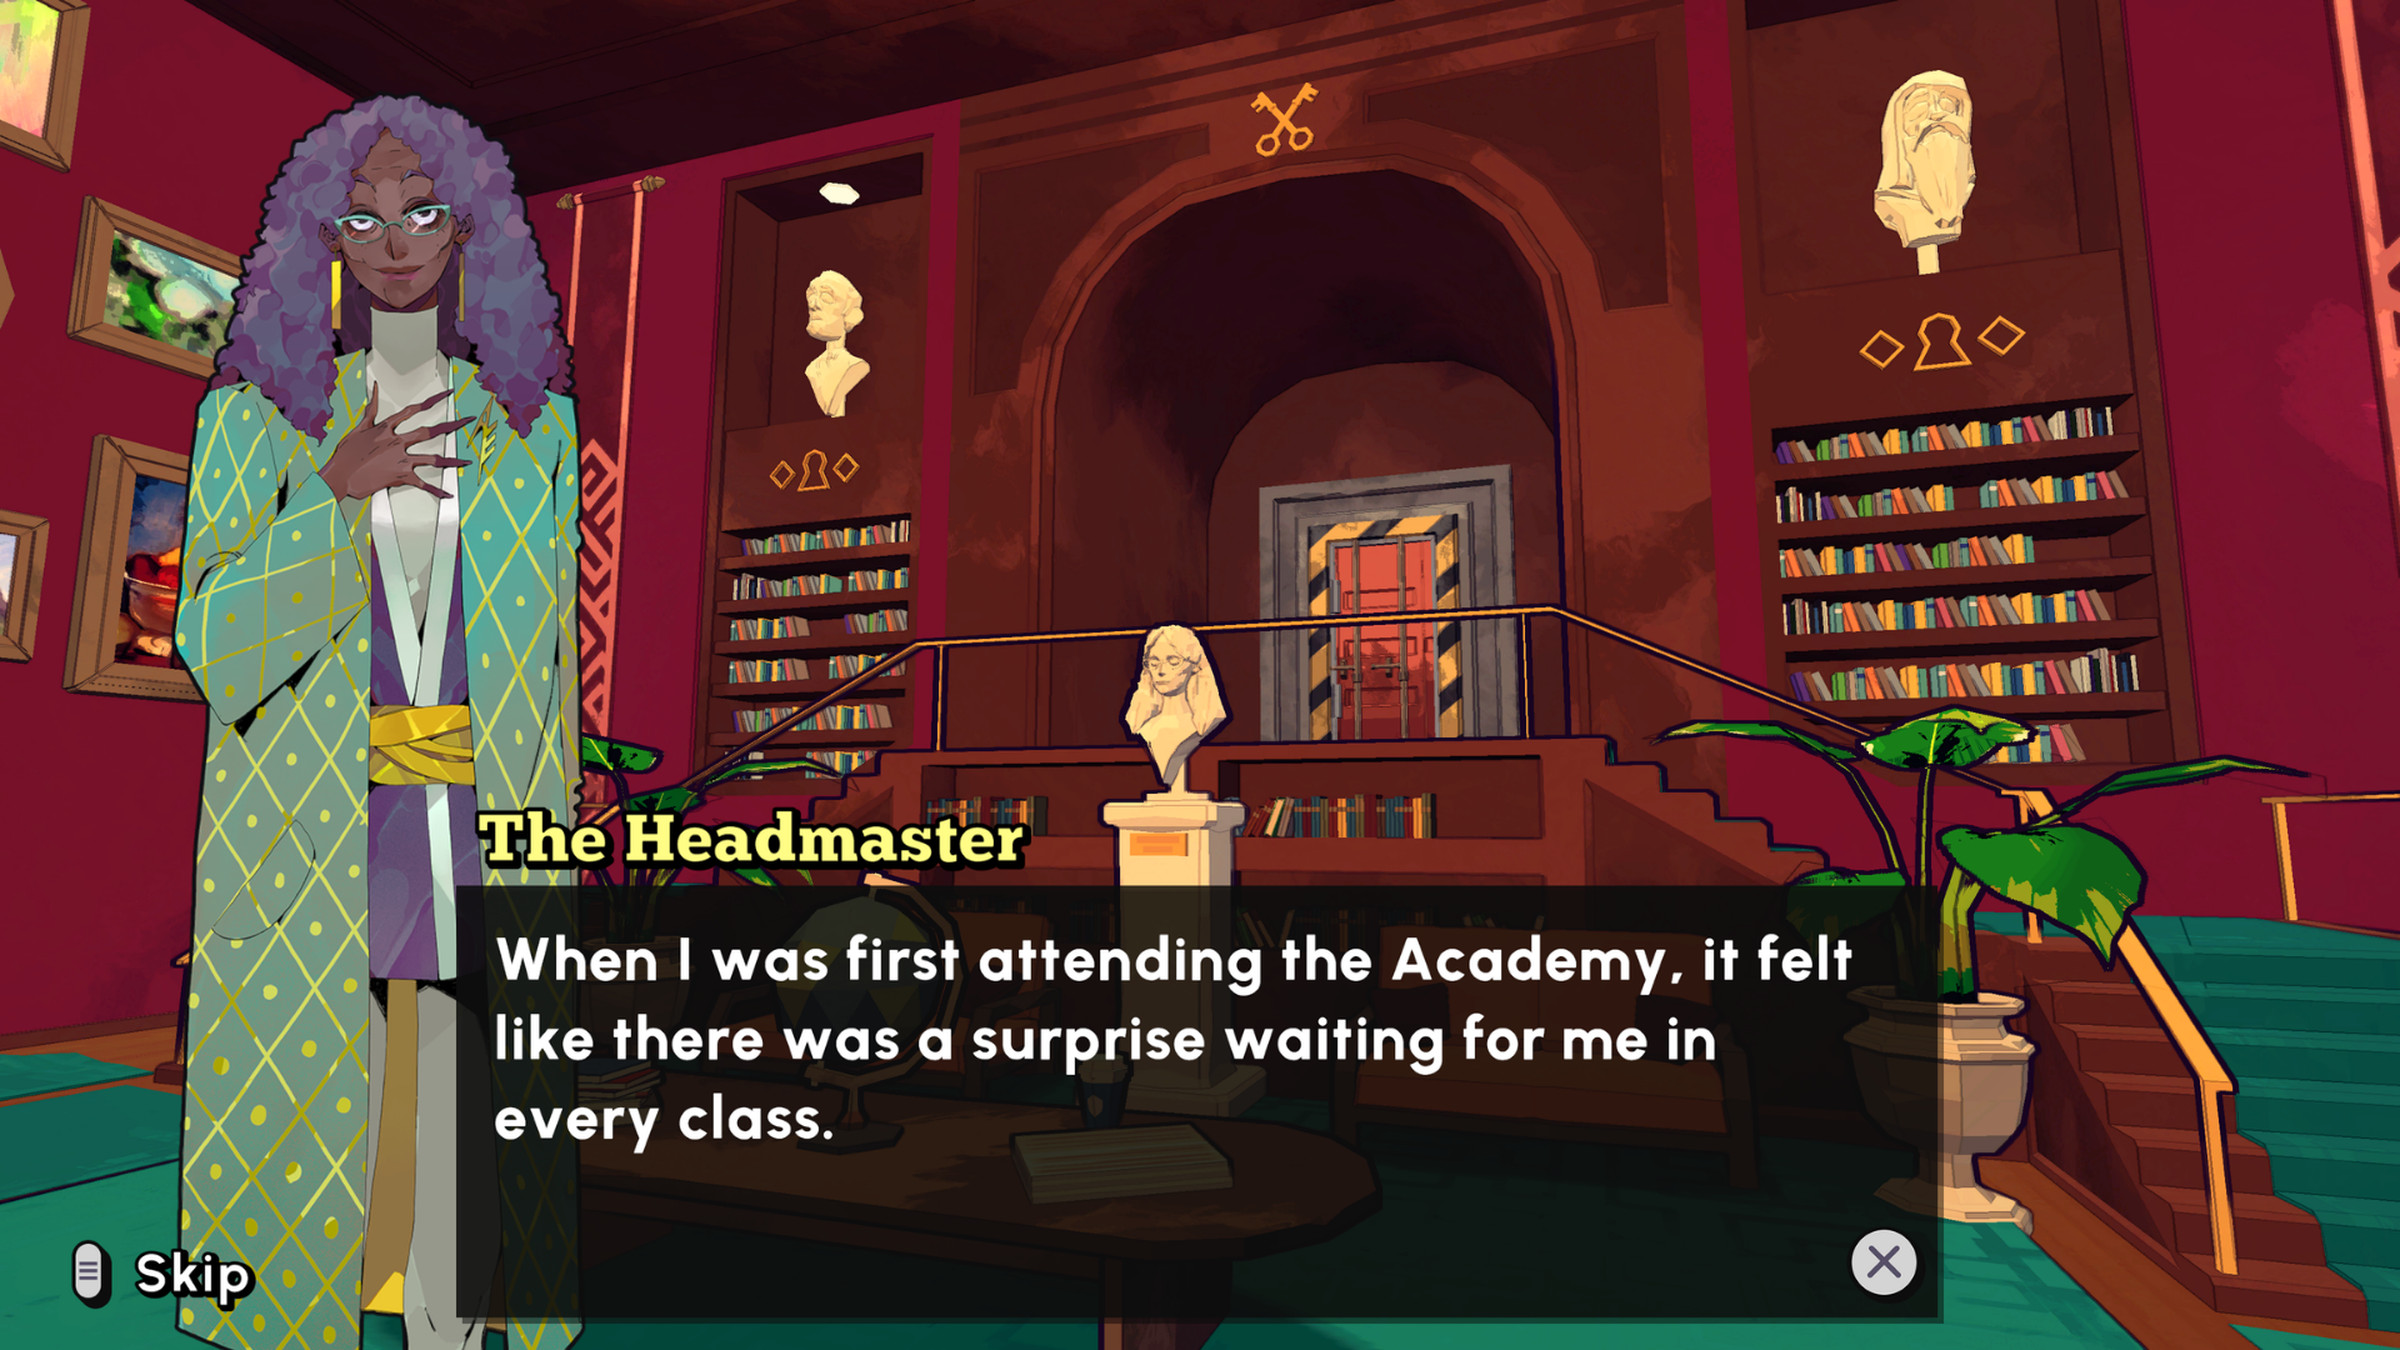 Escape Academy also offers some intriguing storytelling in addition to puzzle solving.